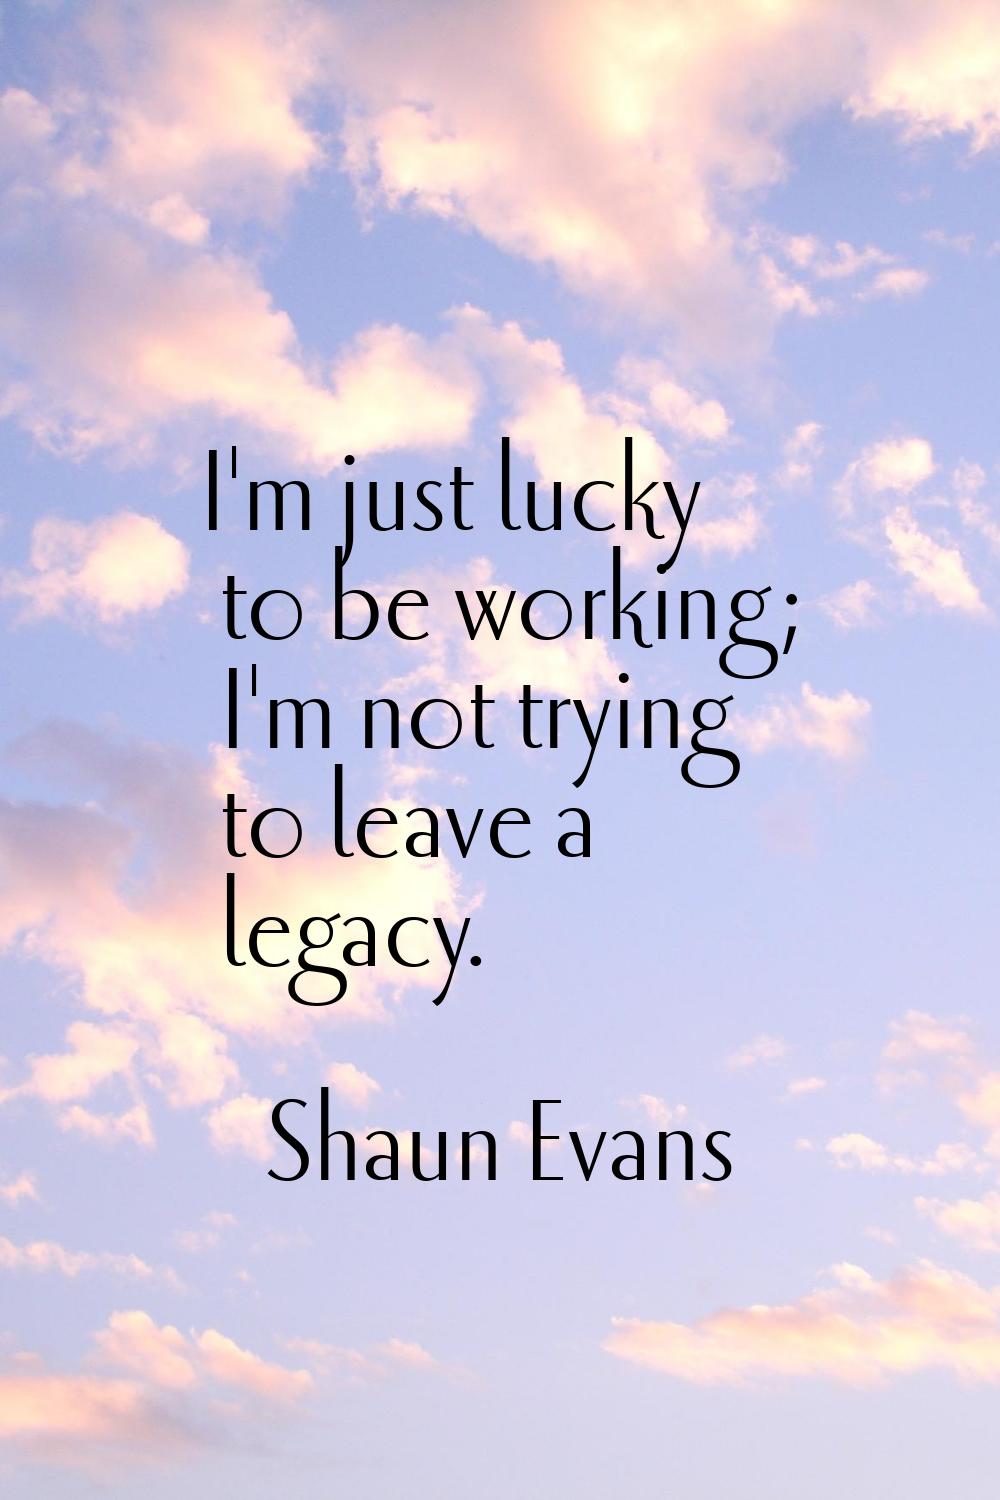 I'm just lucky to be working; I'm not trying to leave a legacy.